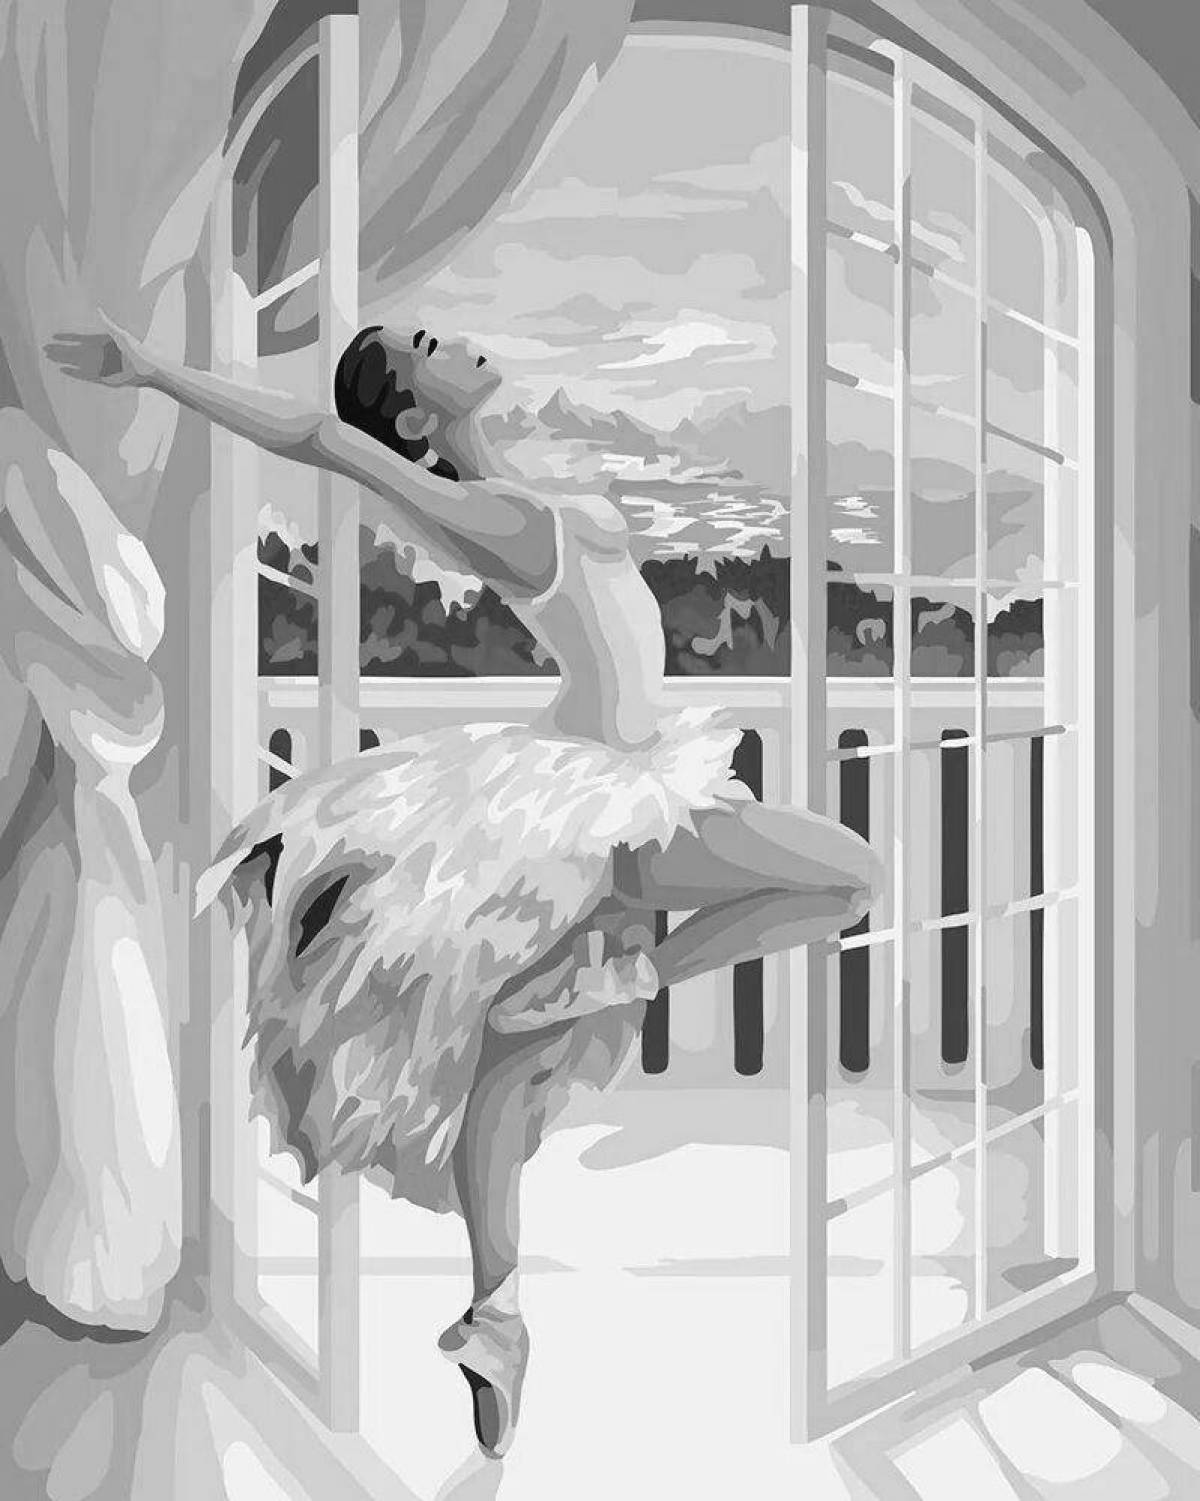 Charming ballerina coloring by numbers